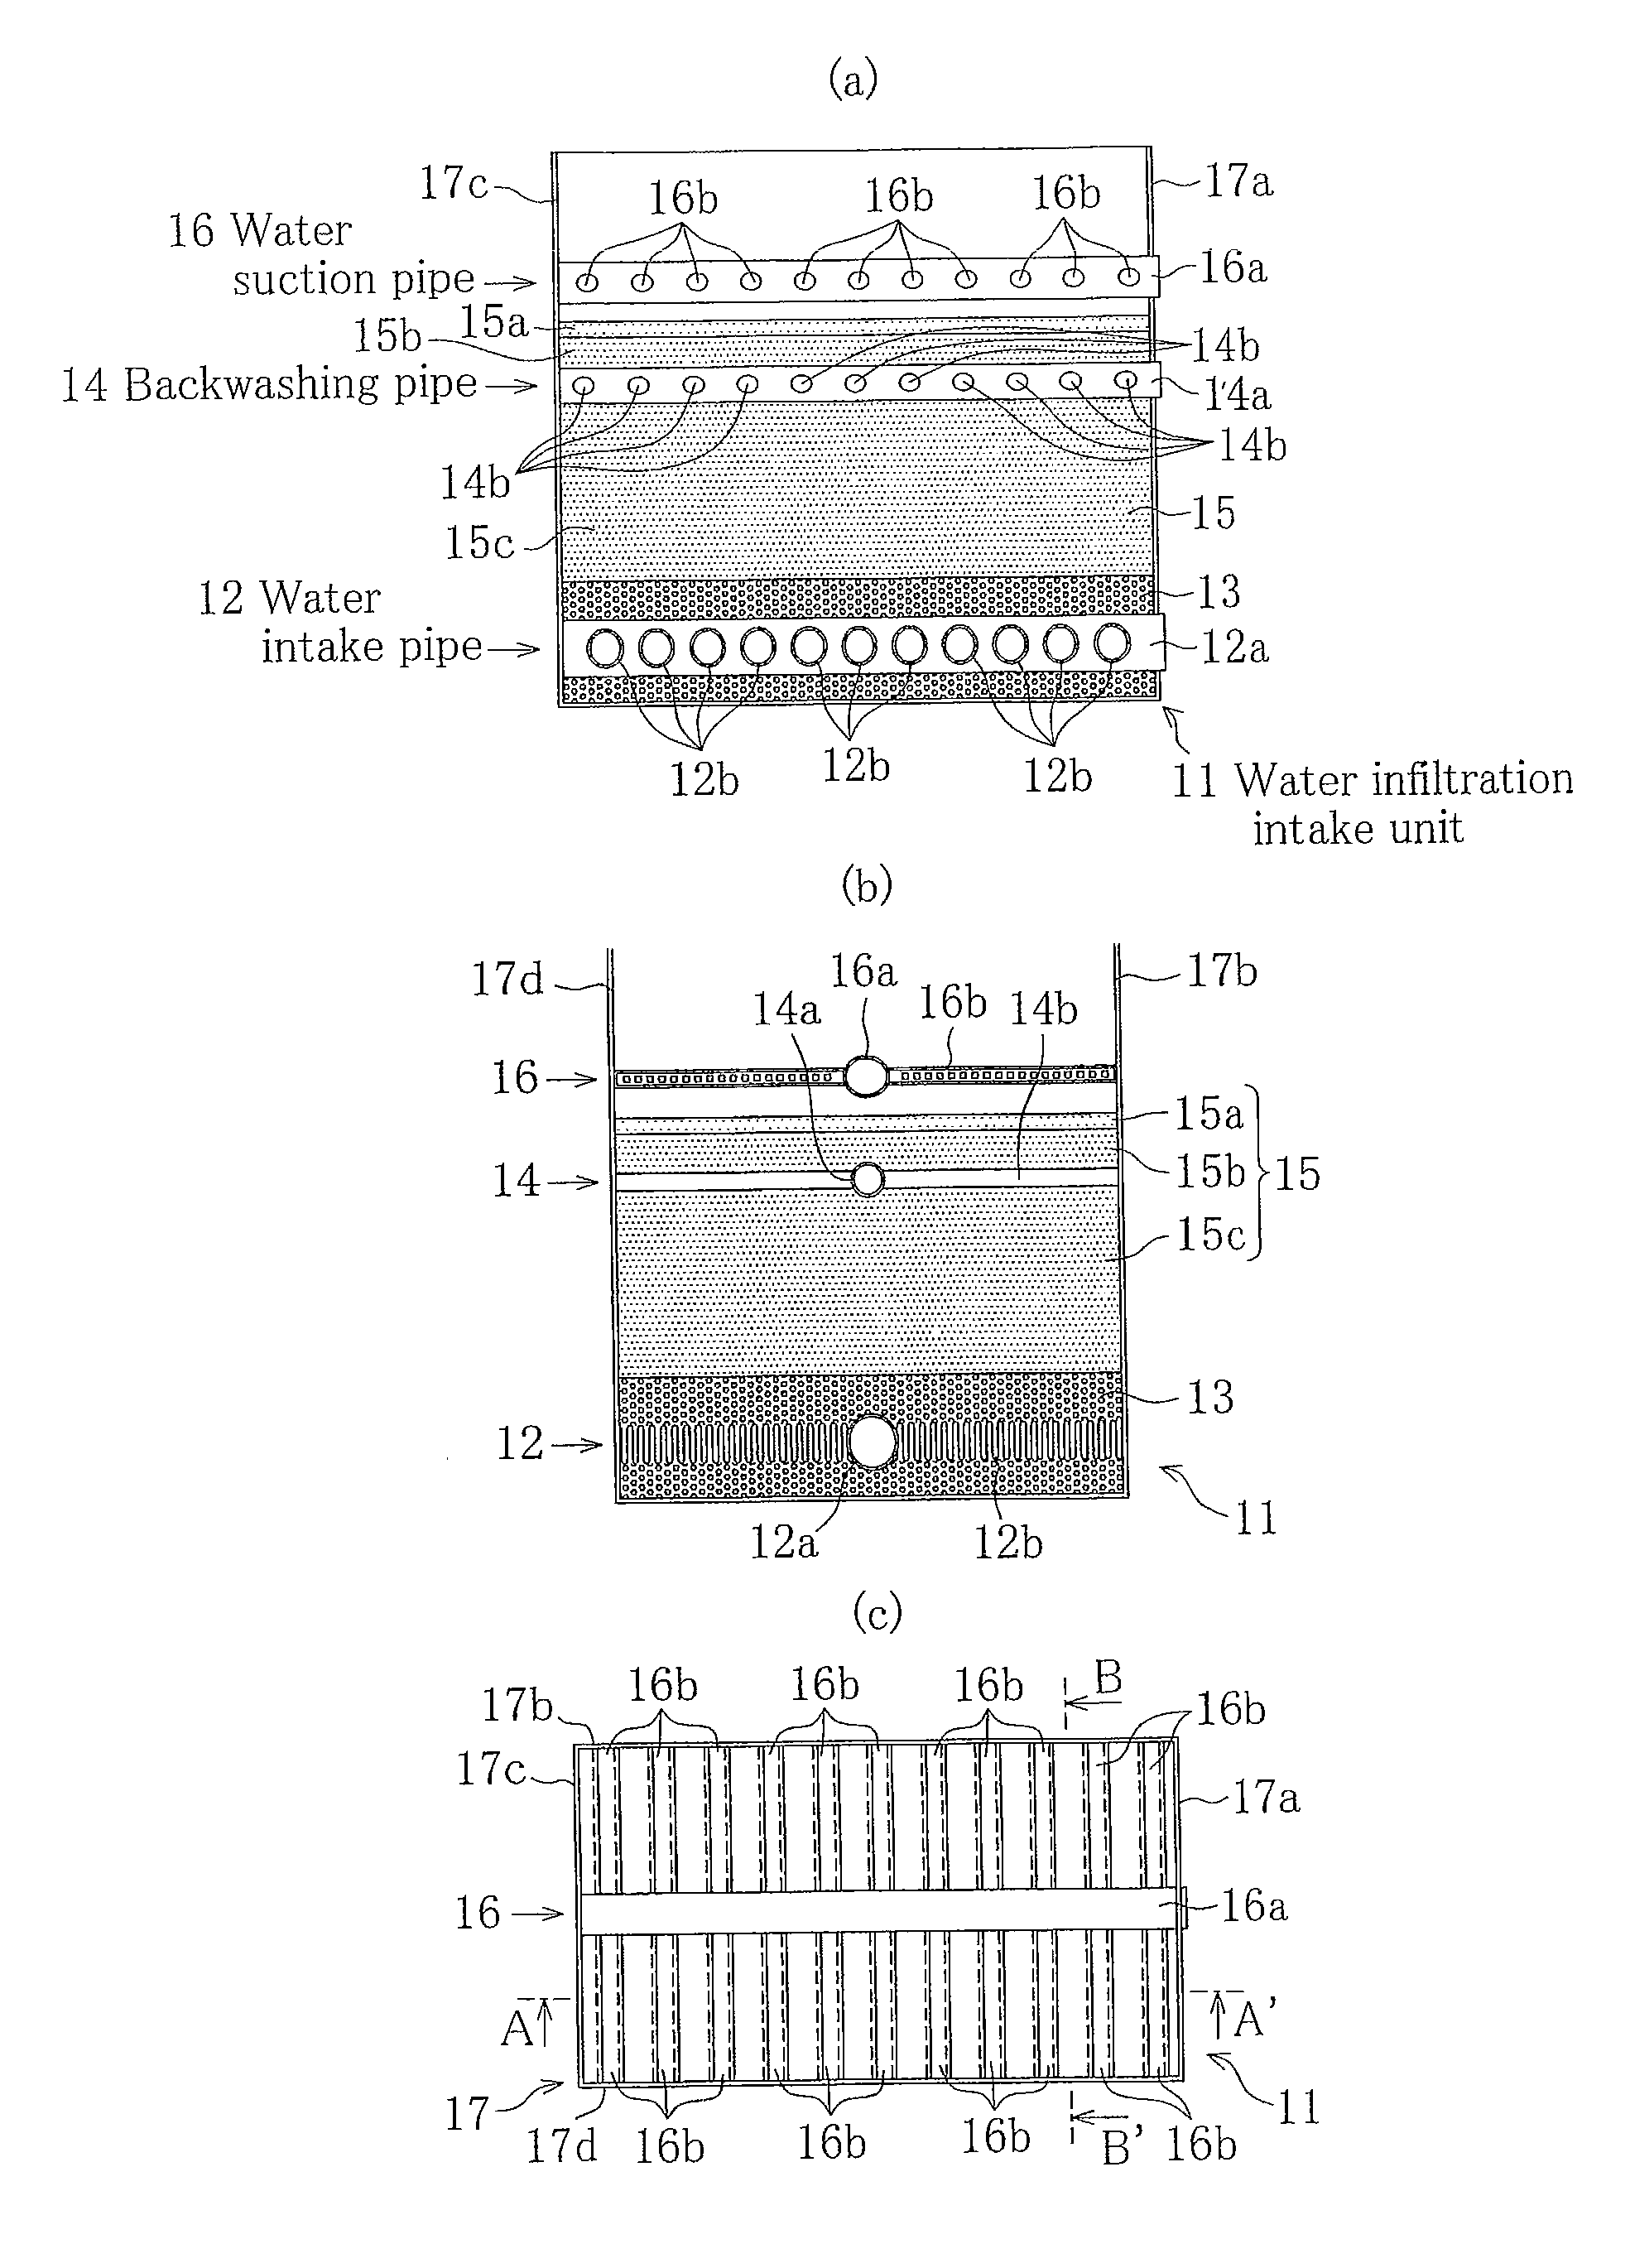 Seawater infiltration method and water infiltration intake unit